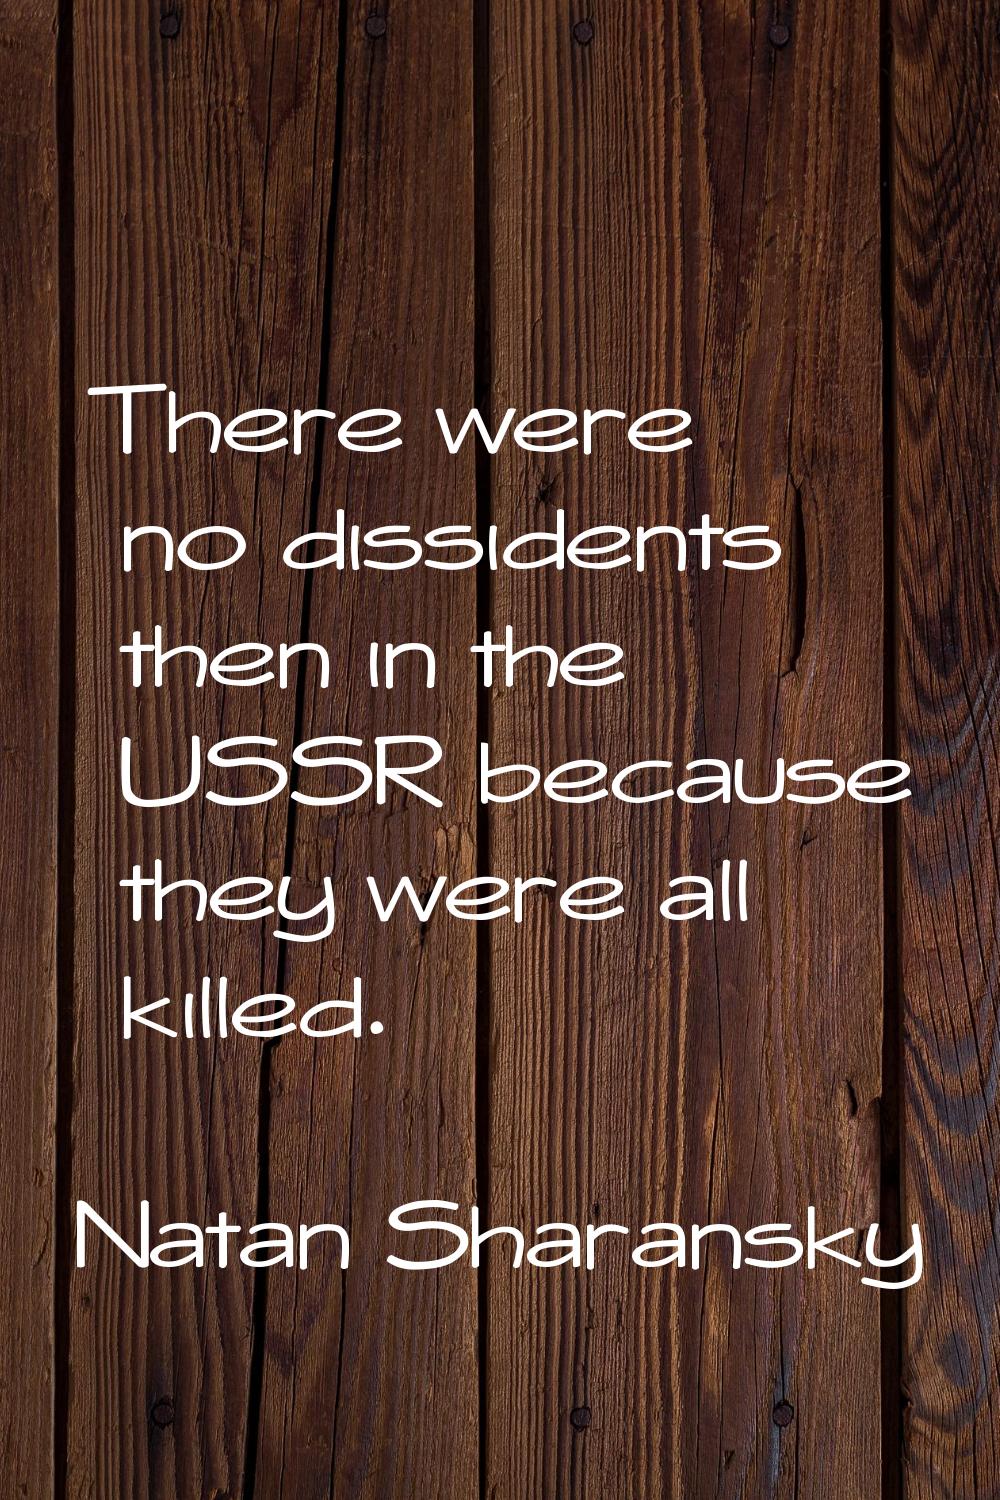 There were no dissidents then in the USSR because they were all killed.